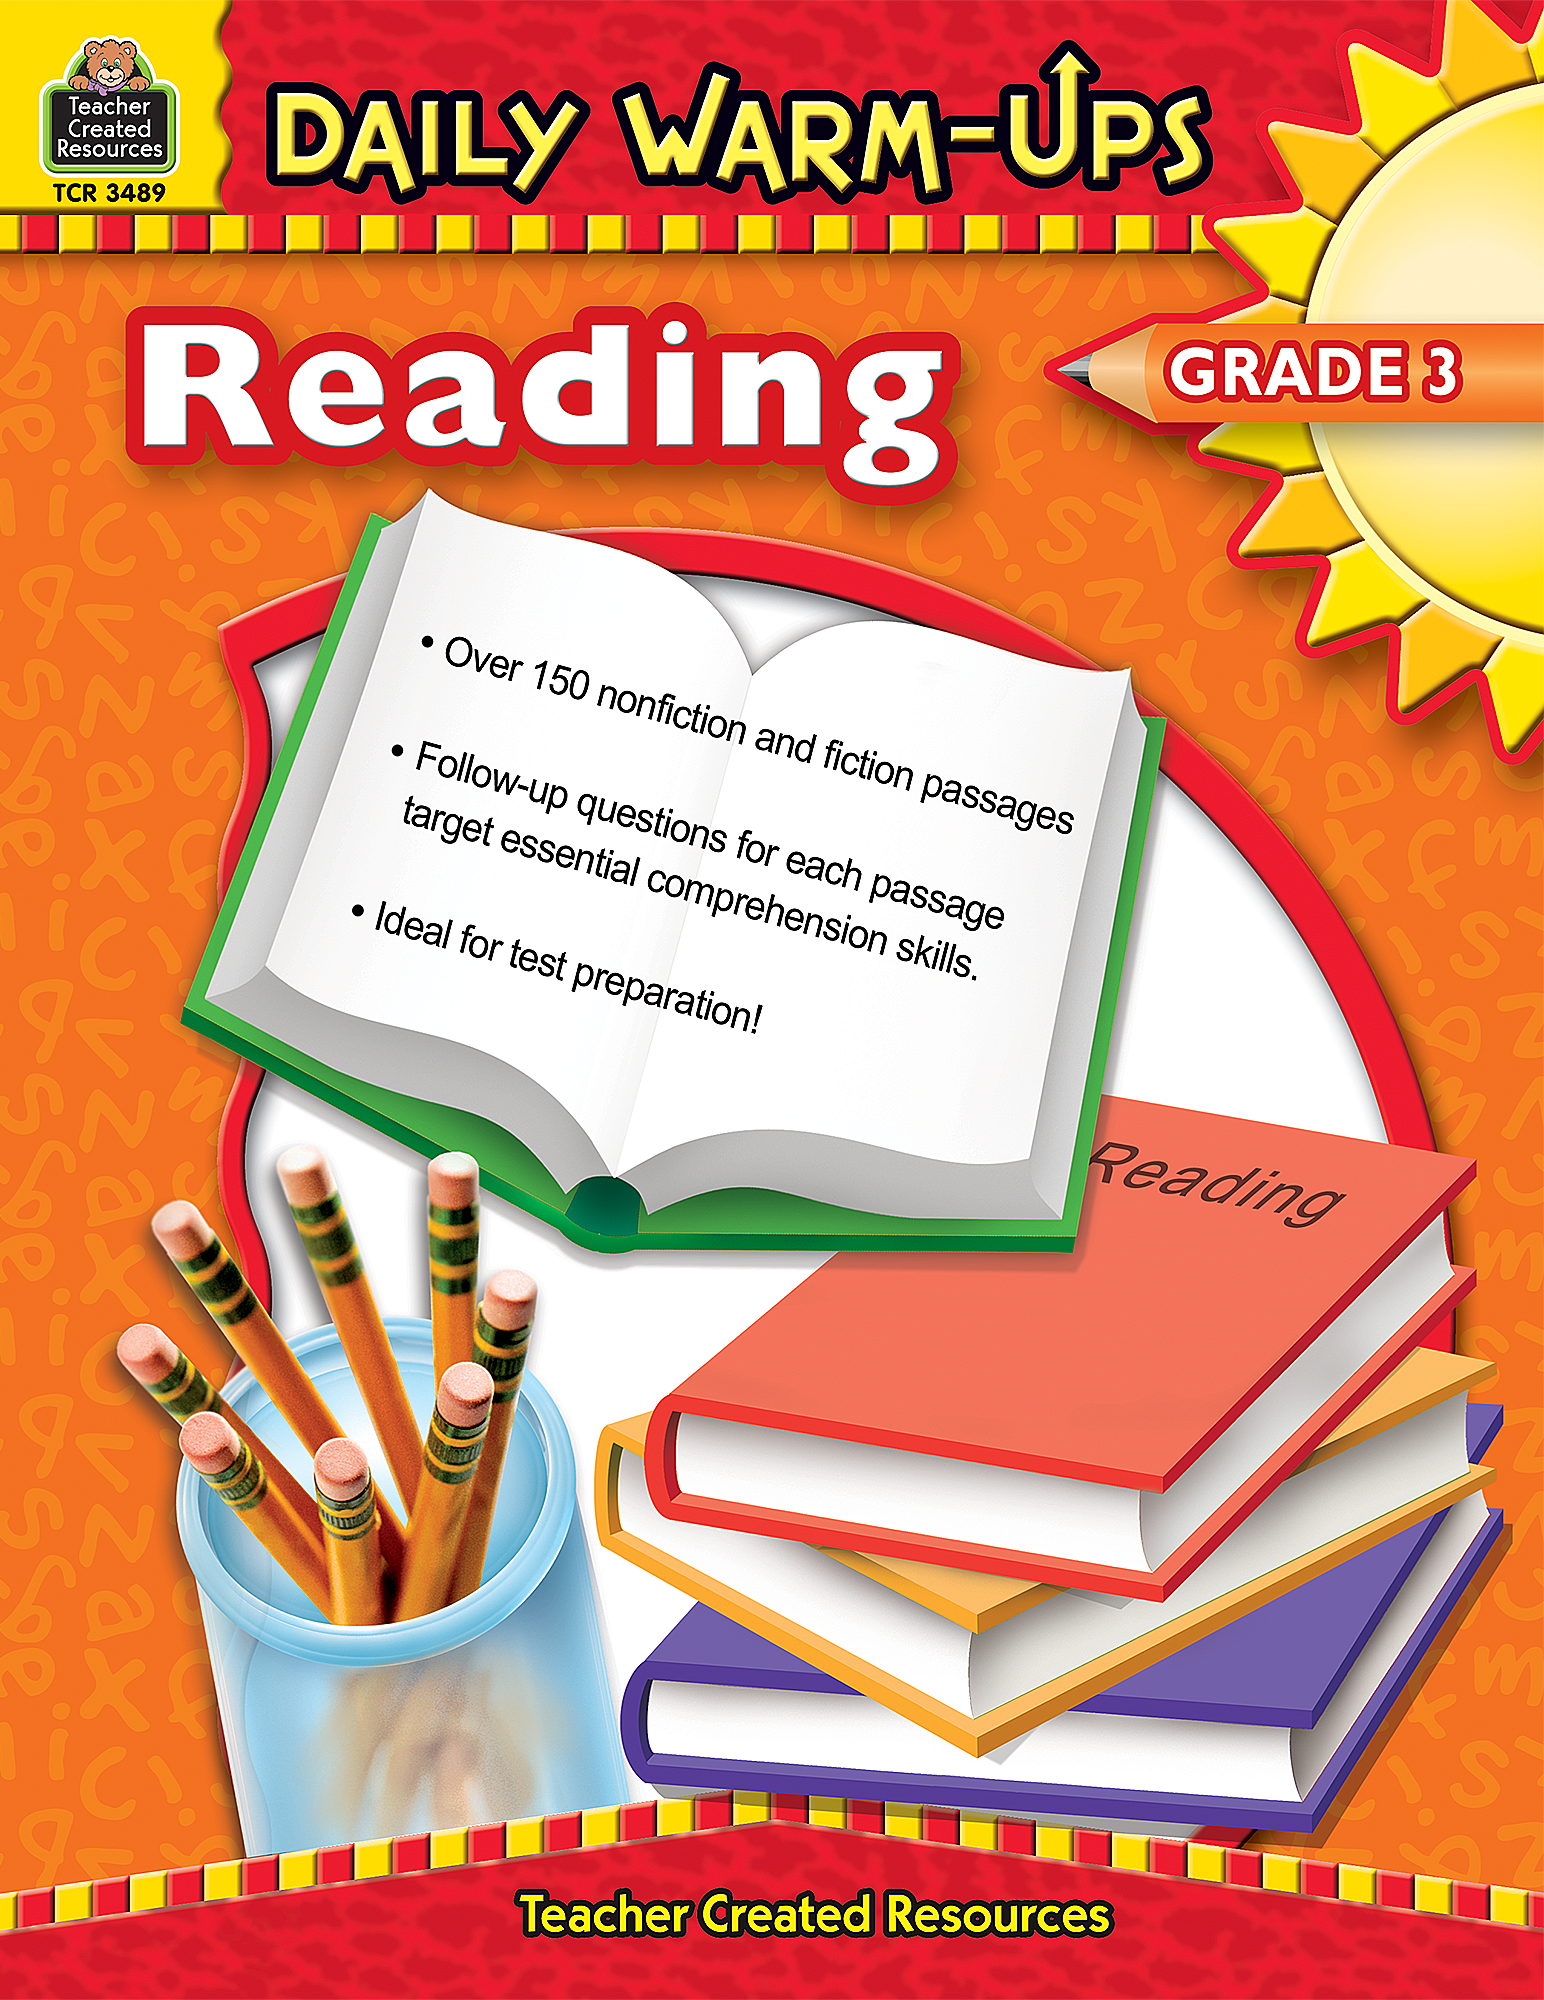 Daily Warm-Ups: Reading, Grade 3 - TCR3489 | Teacher Created Resources